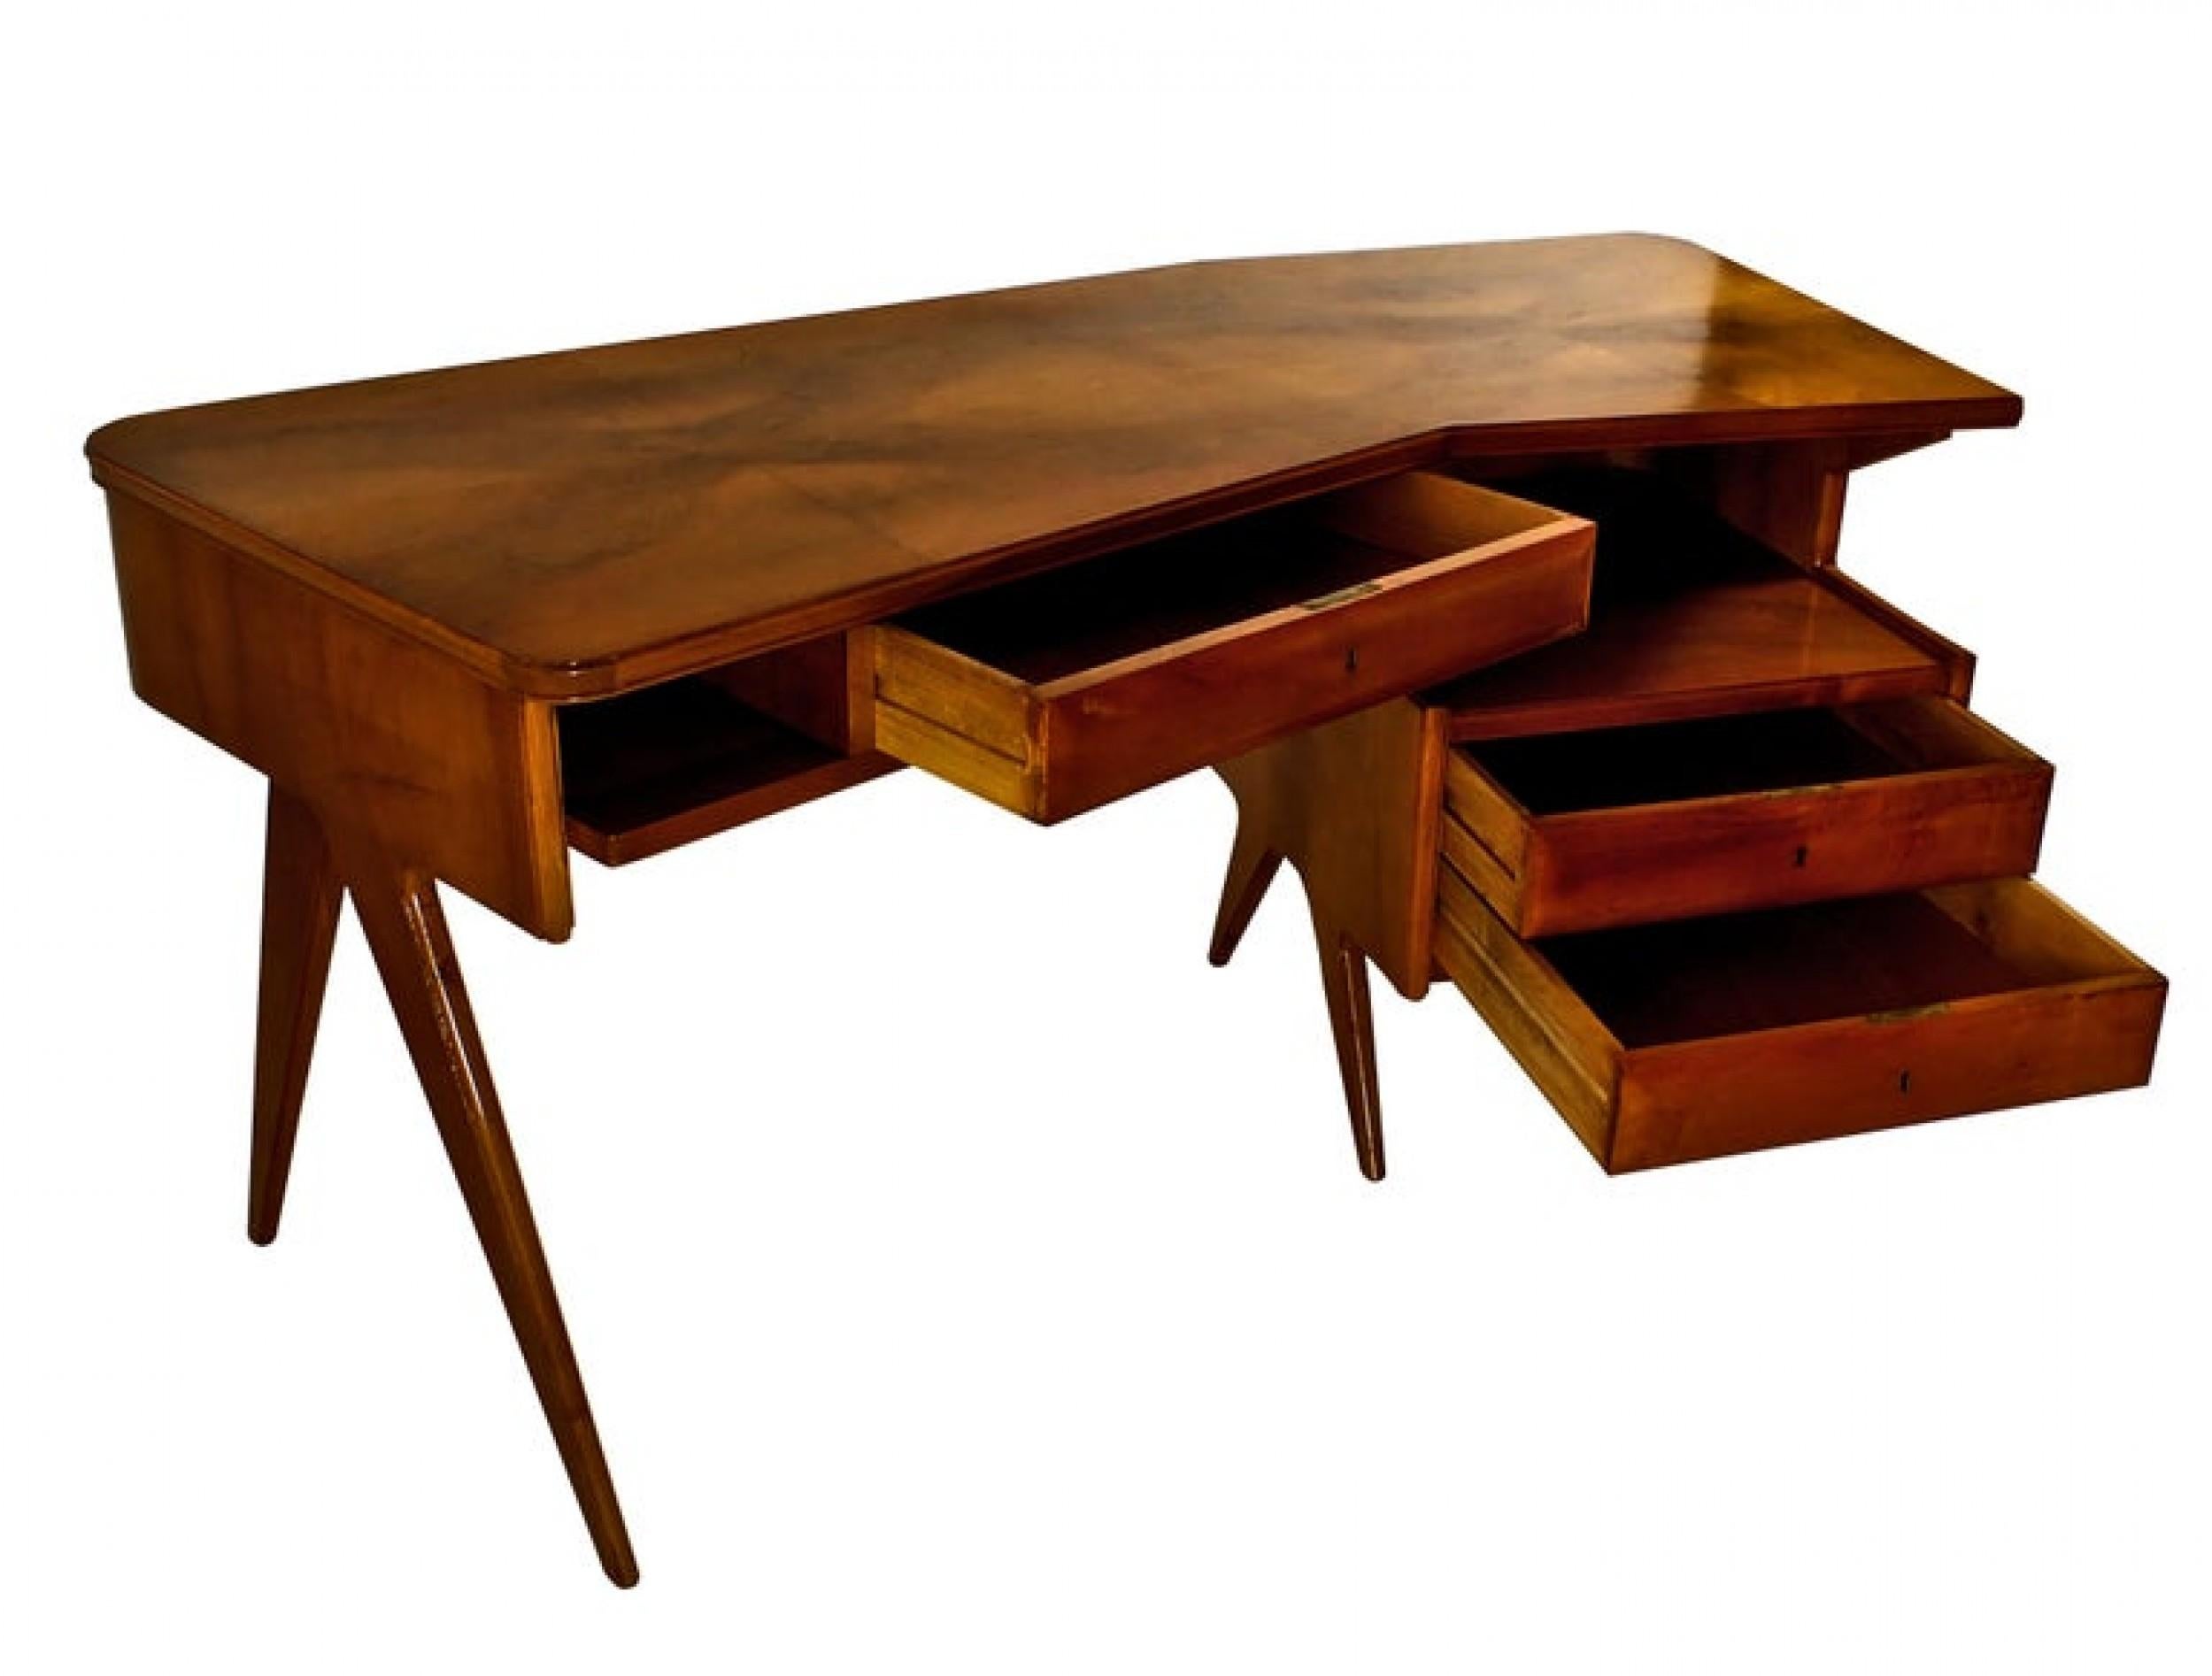 Italian Modern Walnut and Rootwood Desk, Attributed to Gio Ponti For Sale 1